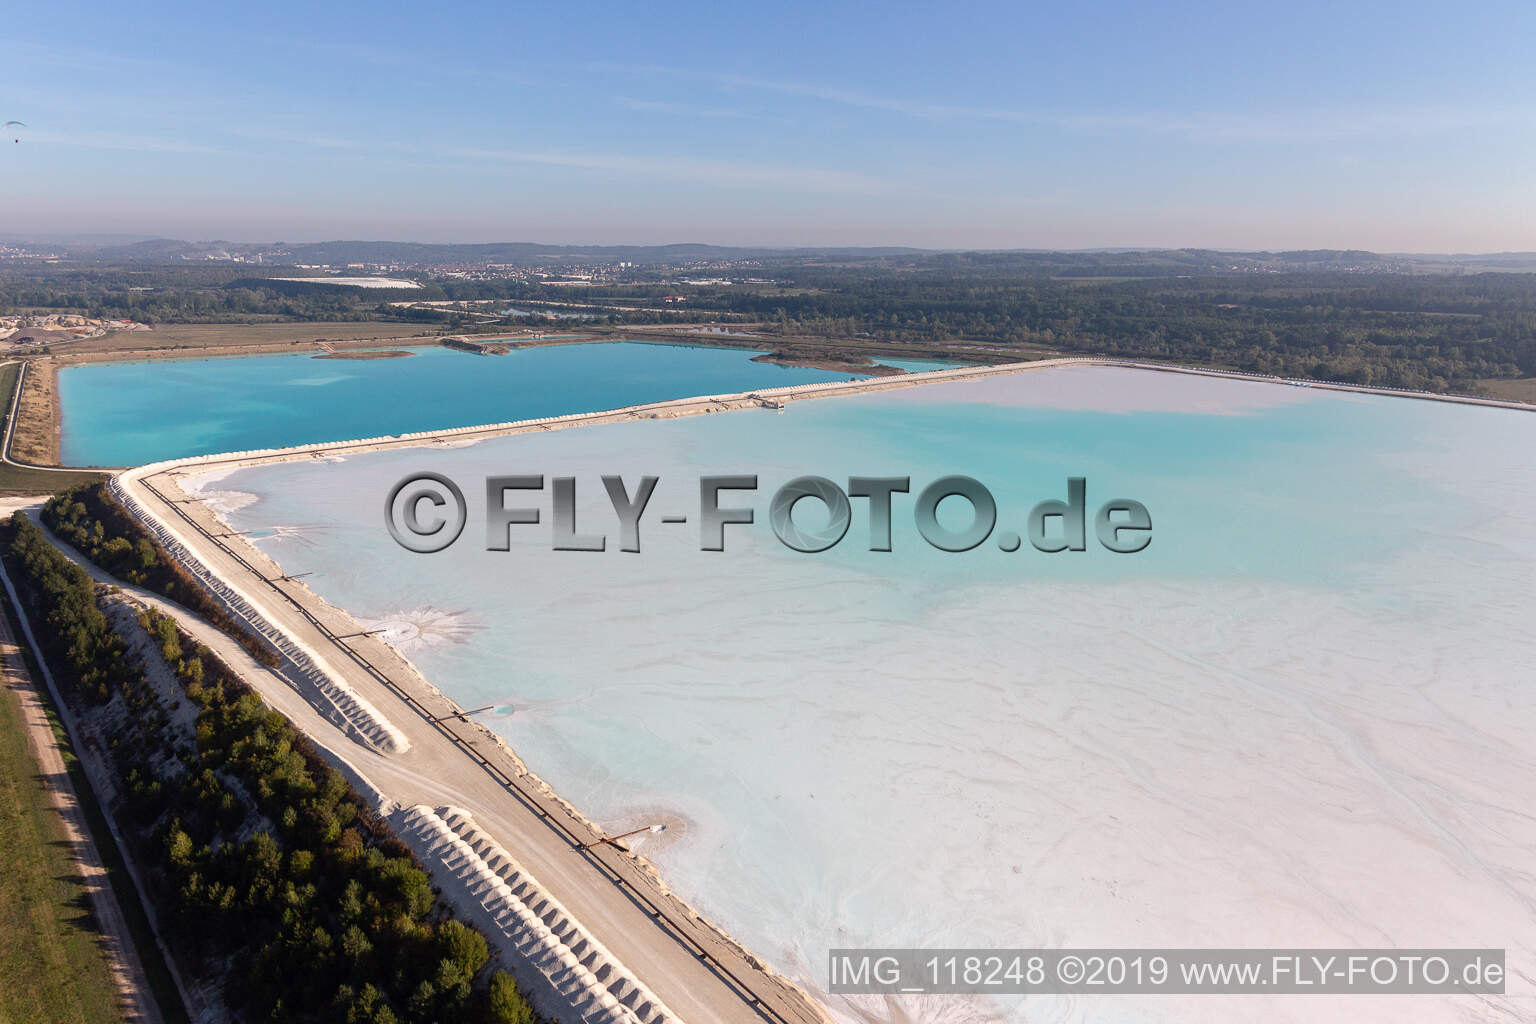 Drone recording of Salt pans in Rosières-aux-Salines in the state Meurthe et Moselle, France